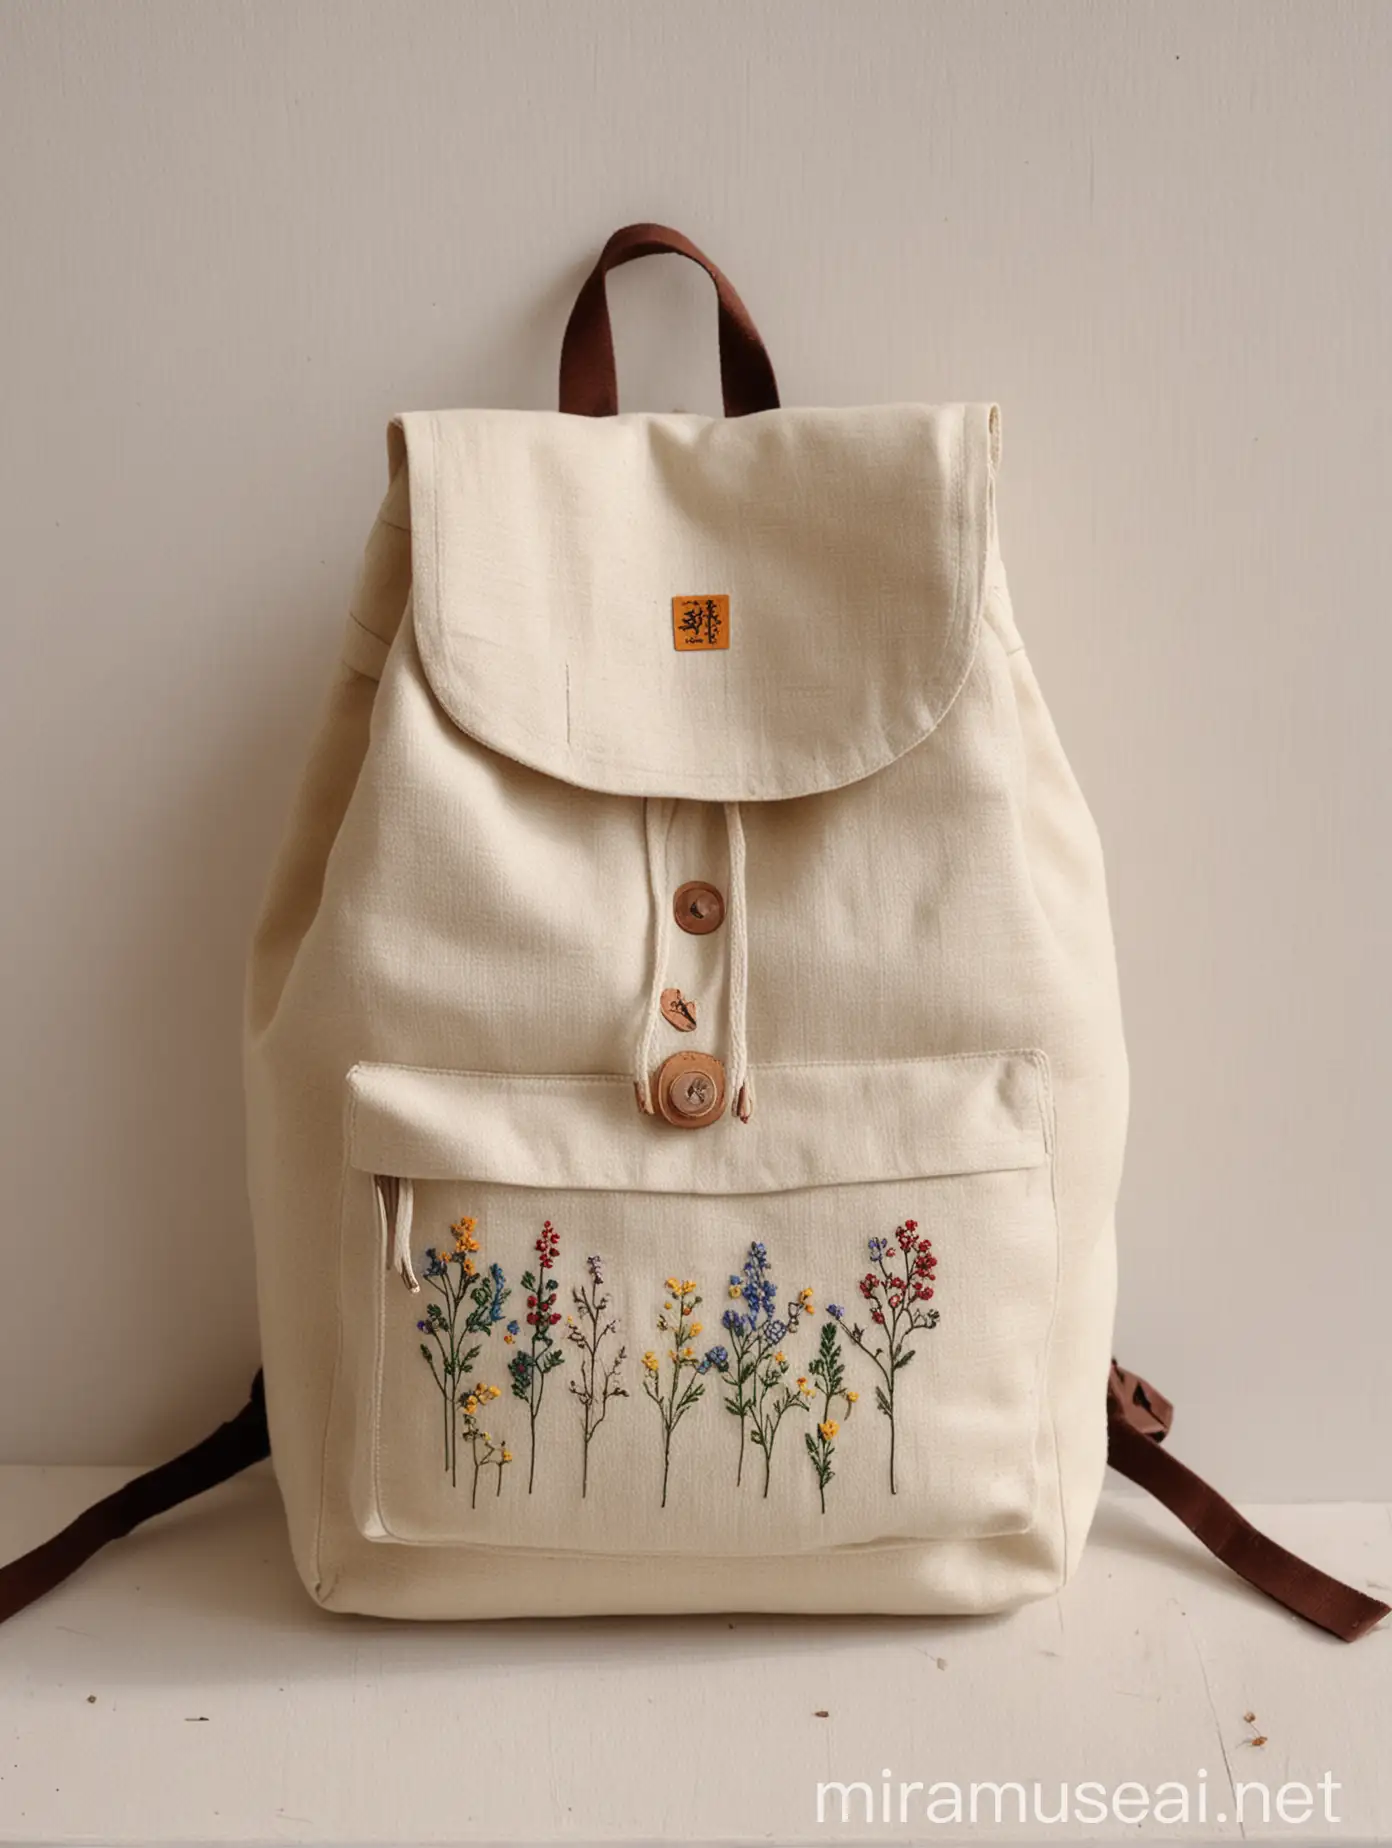 Fabric backpack, linen material, cream fabric color, small embroidery